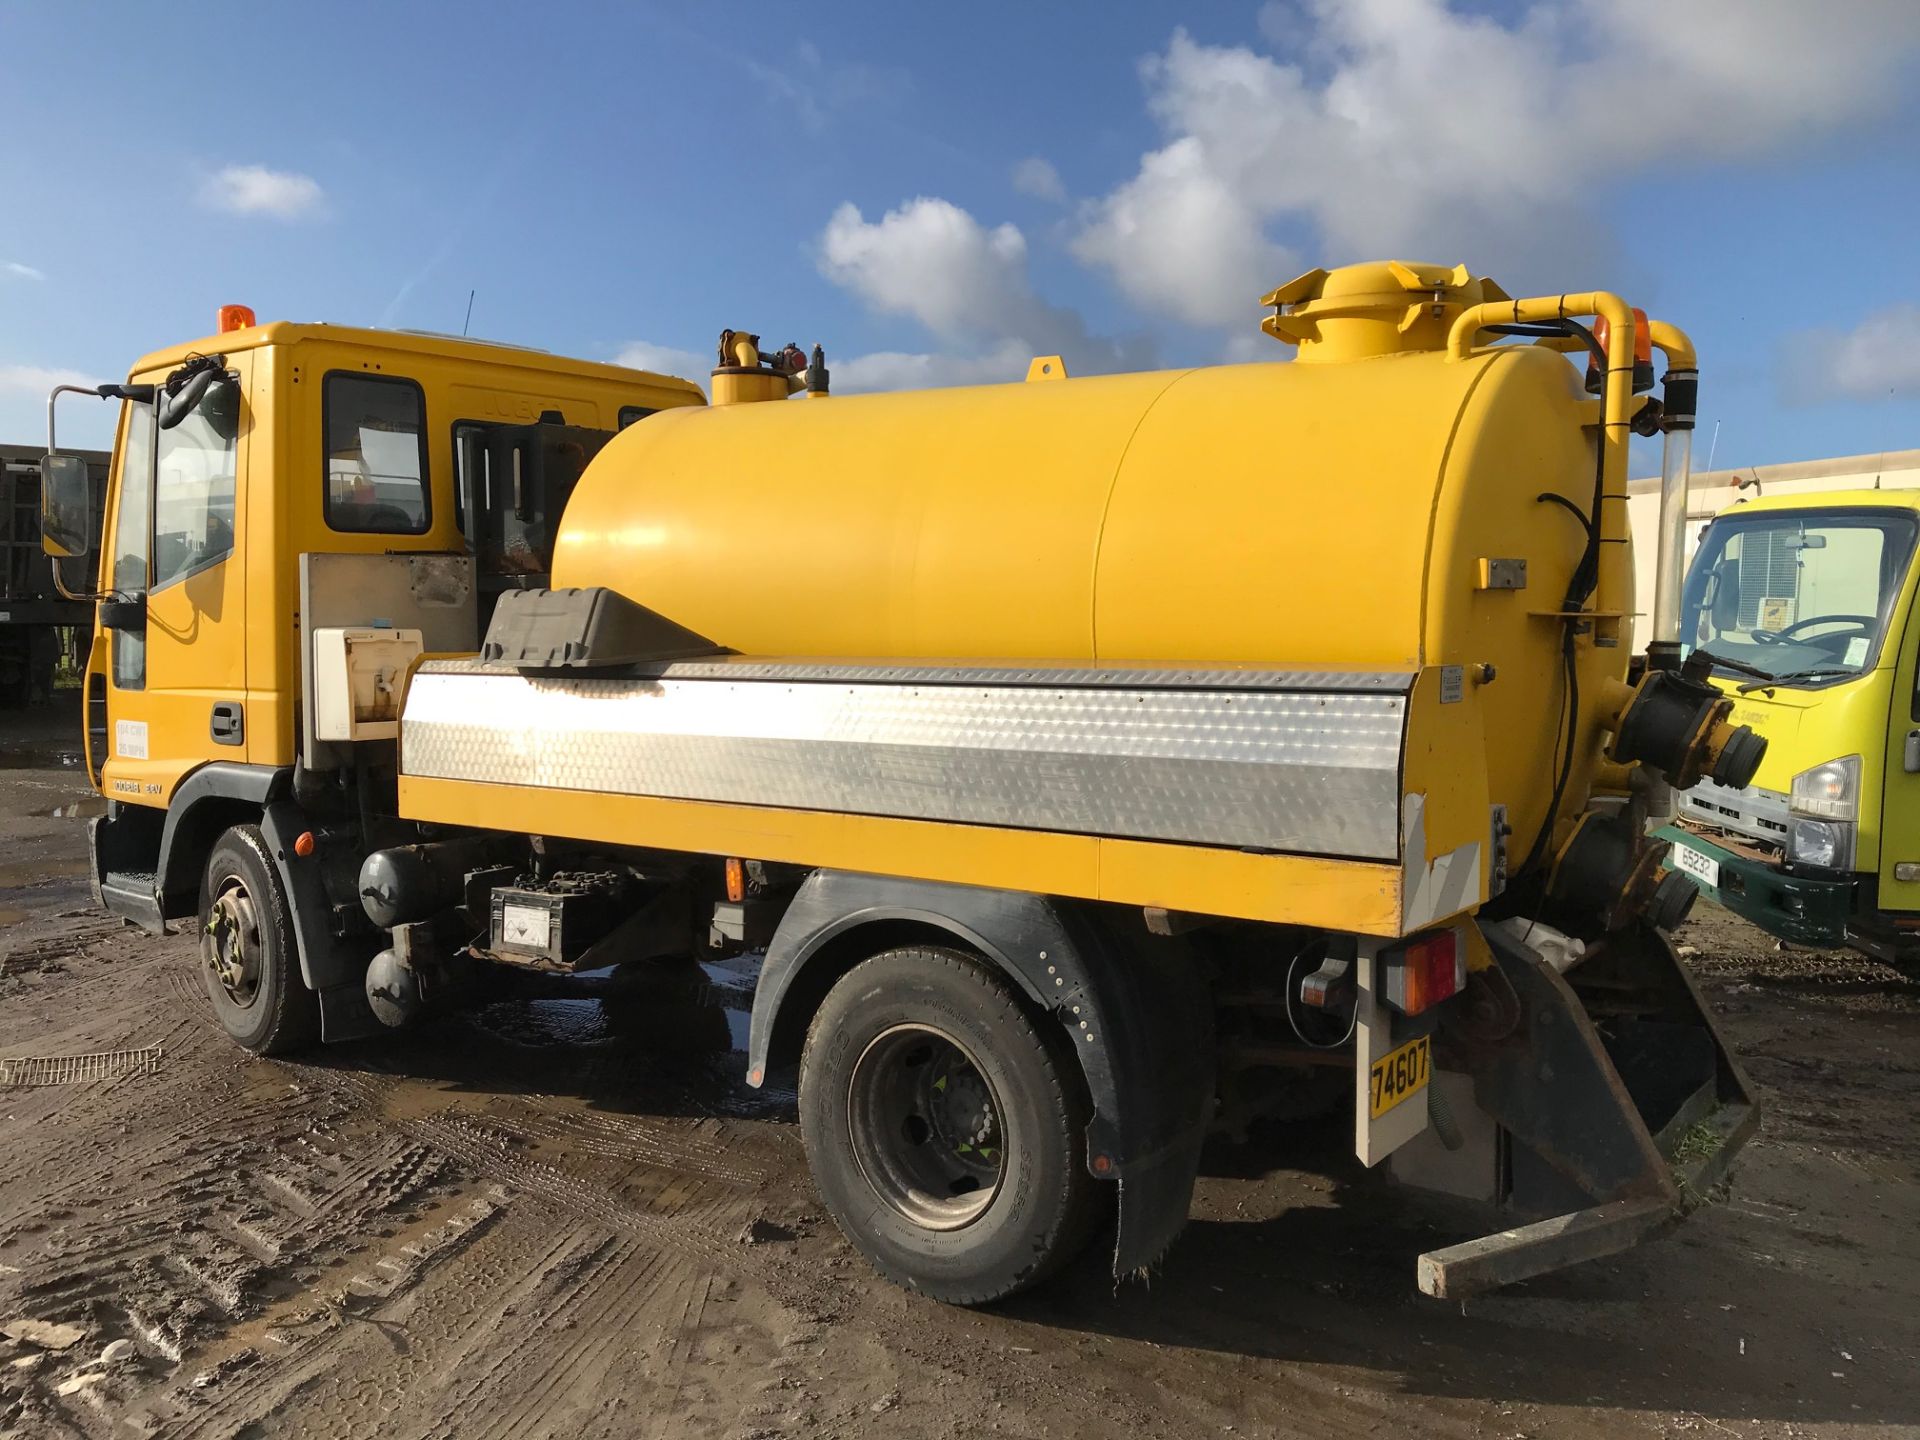 2010 Iveco 800 Gallon Gully Tanker - Image 7 of 7